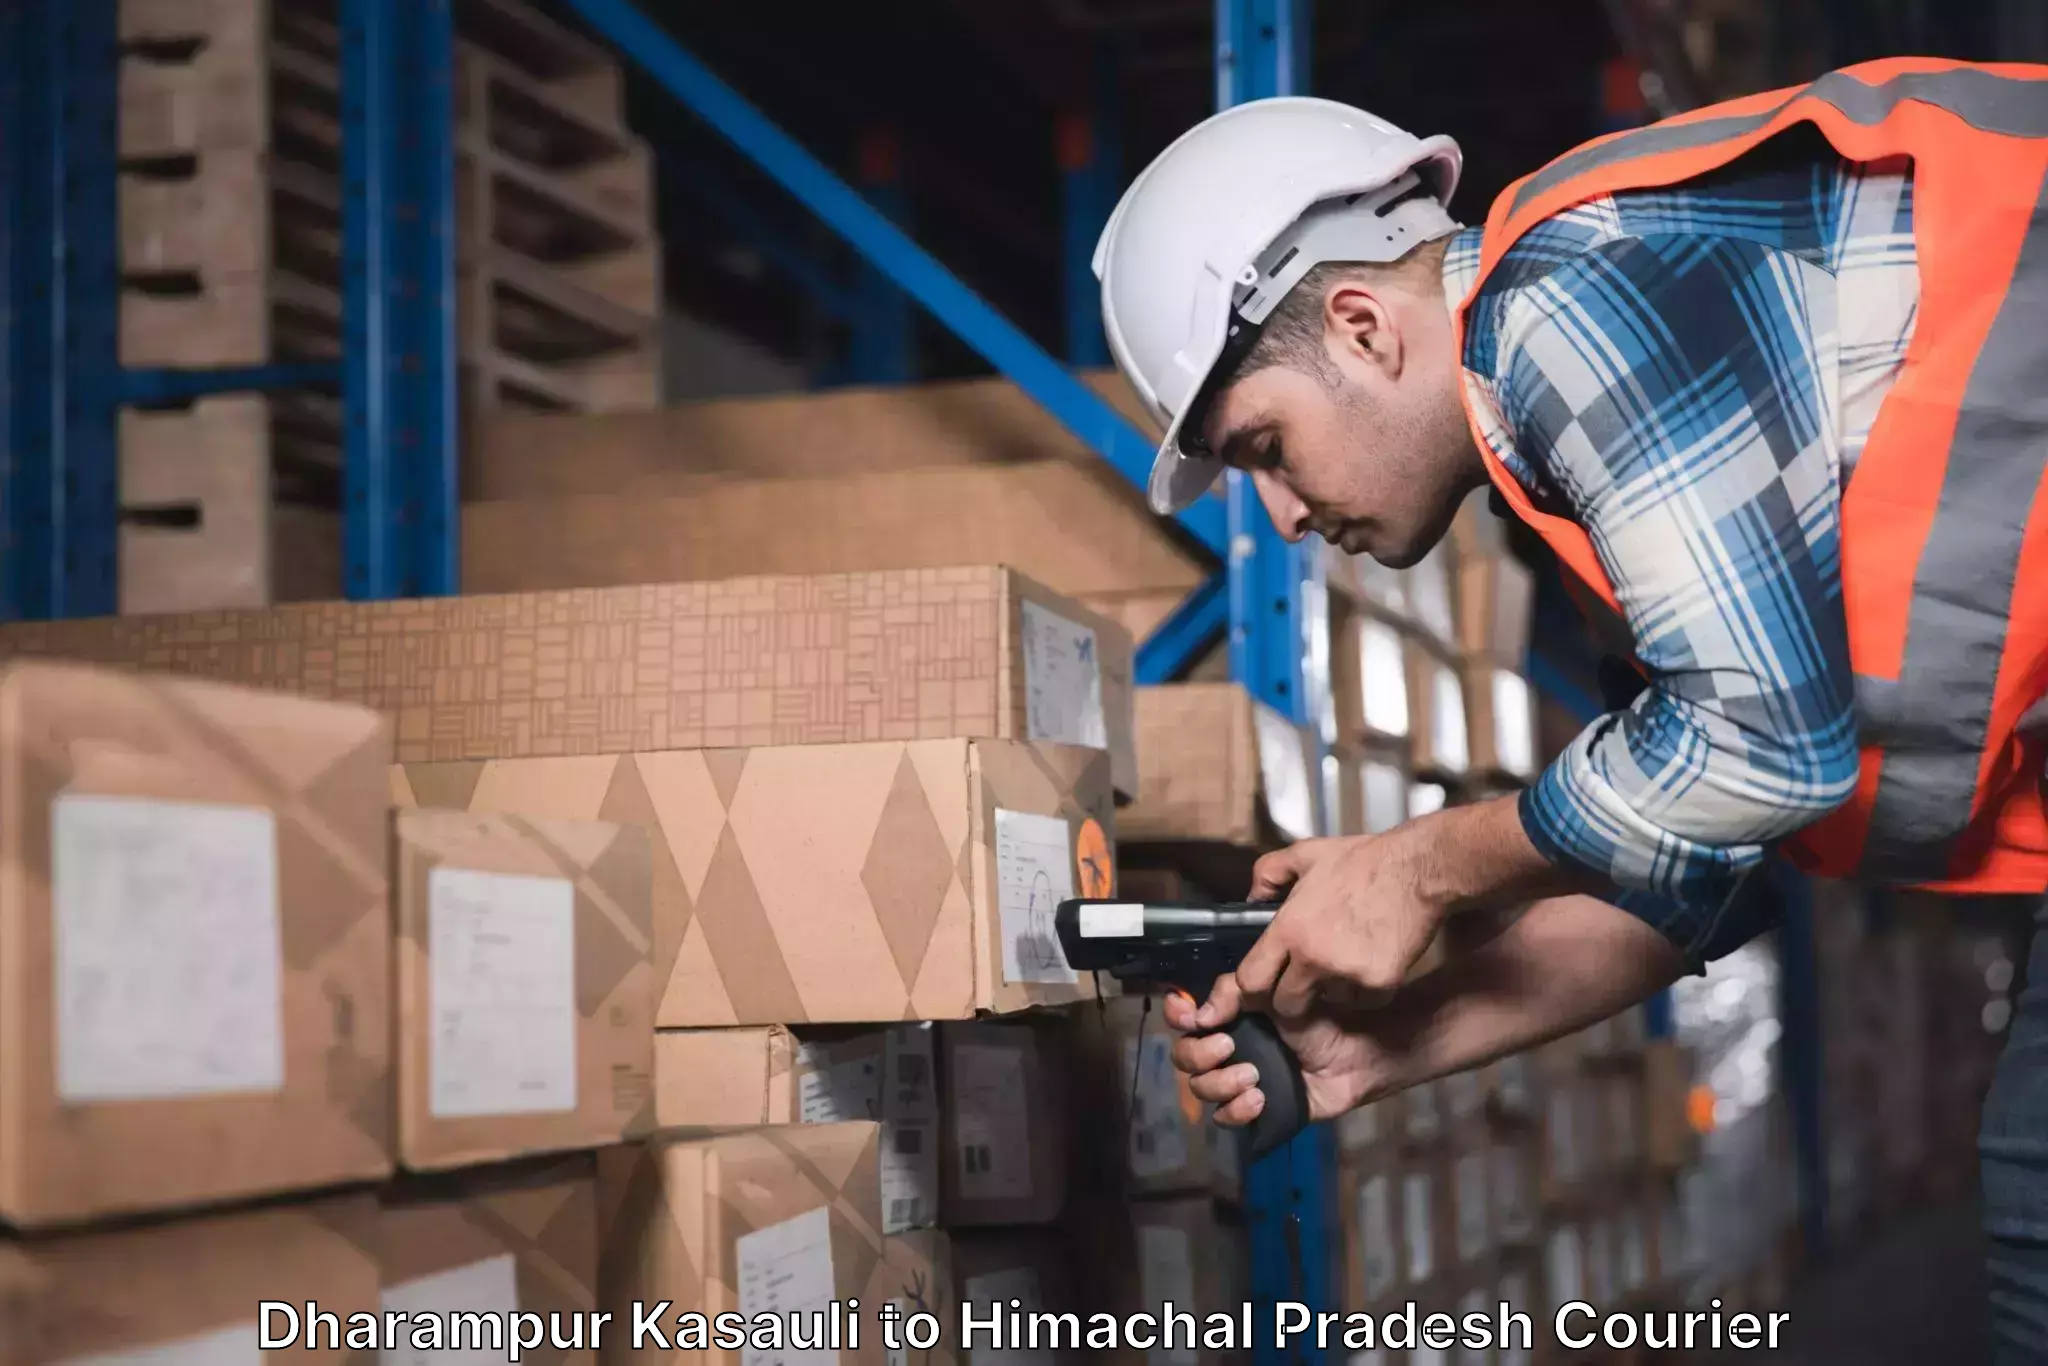 Professional courier services in Dharampur Kasauli to Dharamshala